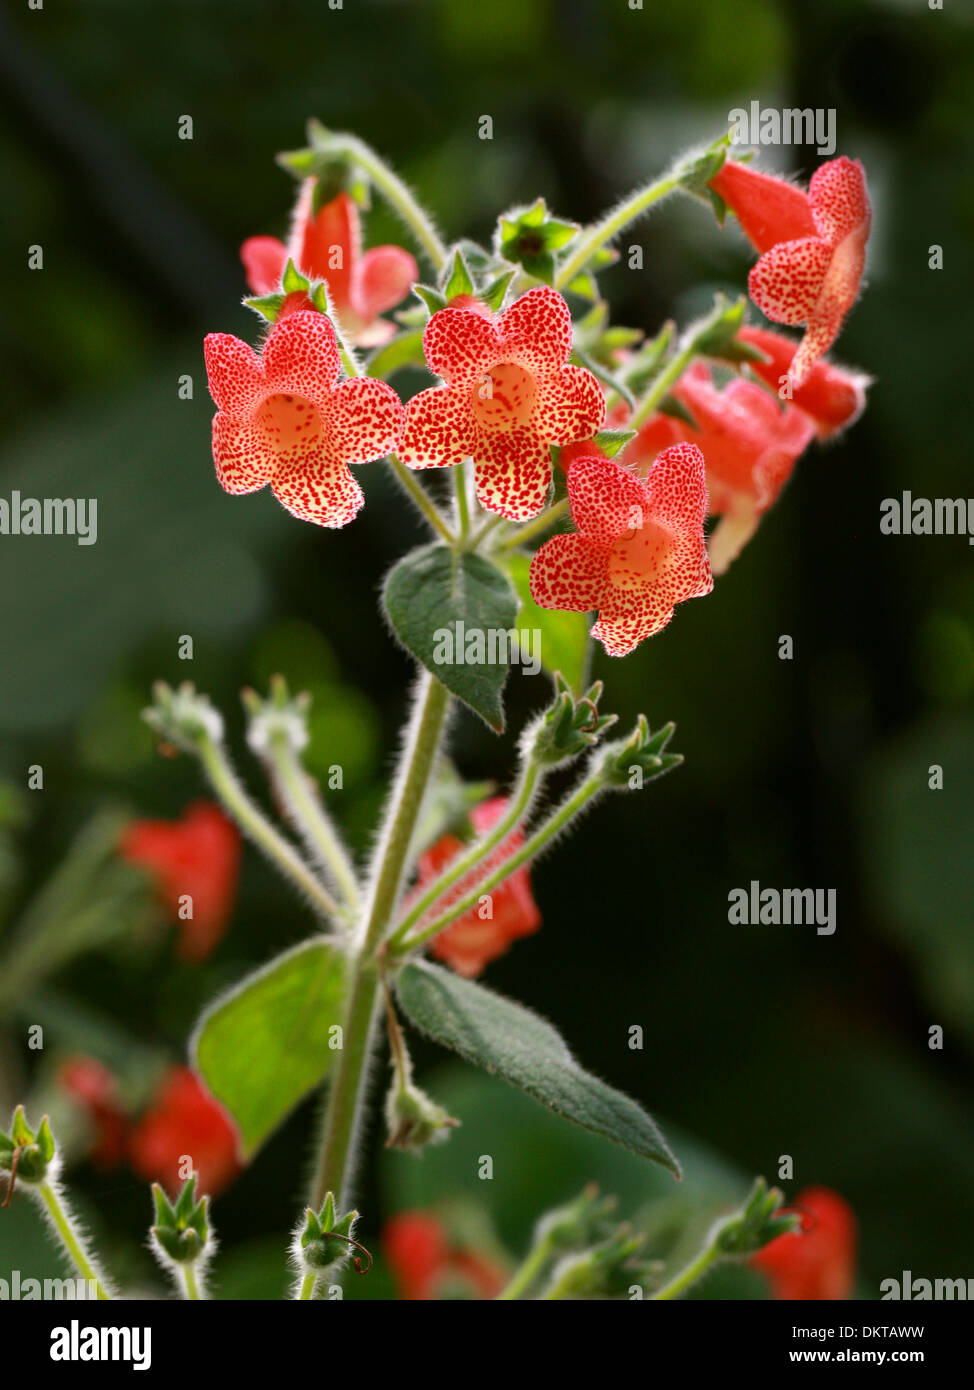 Monkey Flower, Mimulus sp., Phrymaceae. Red Spotted cultivar. Stock Photo